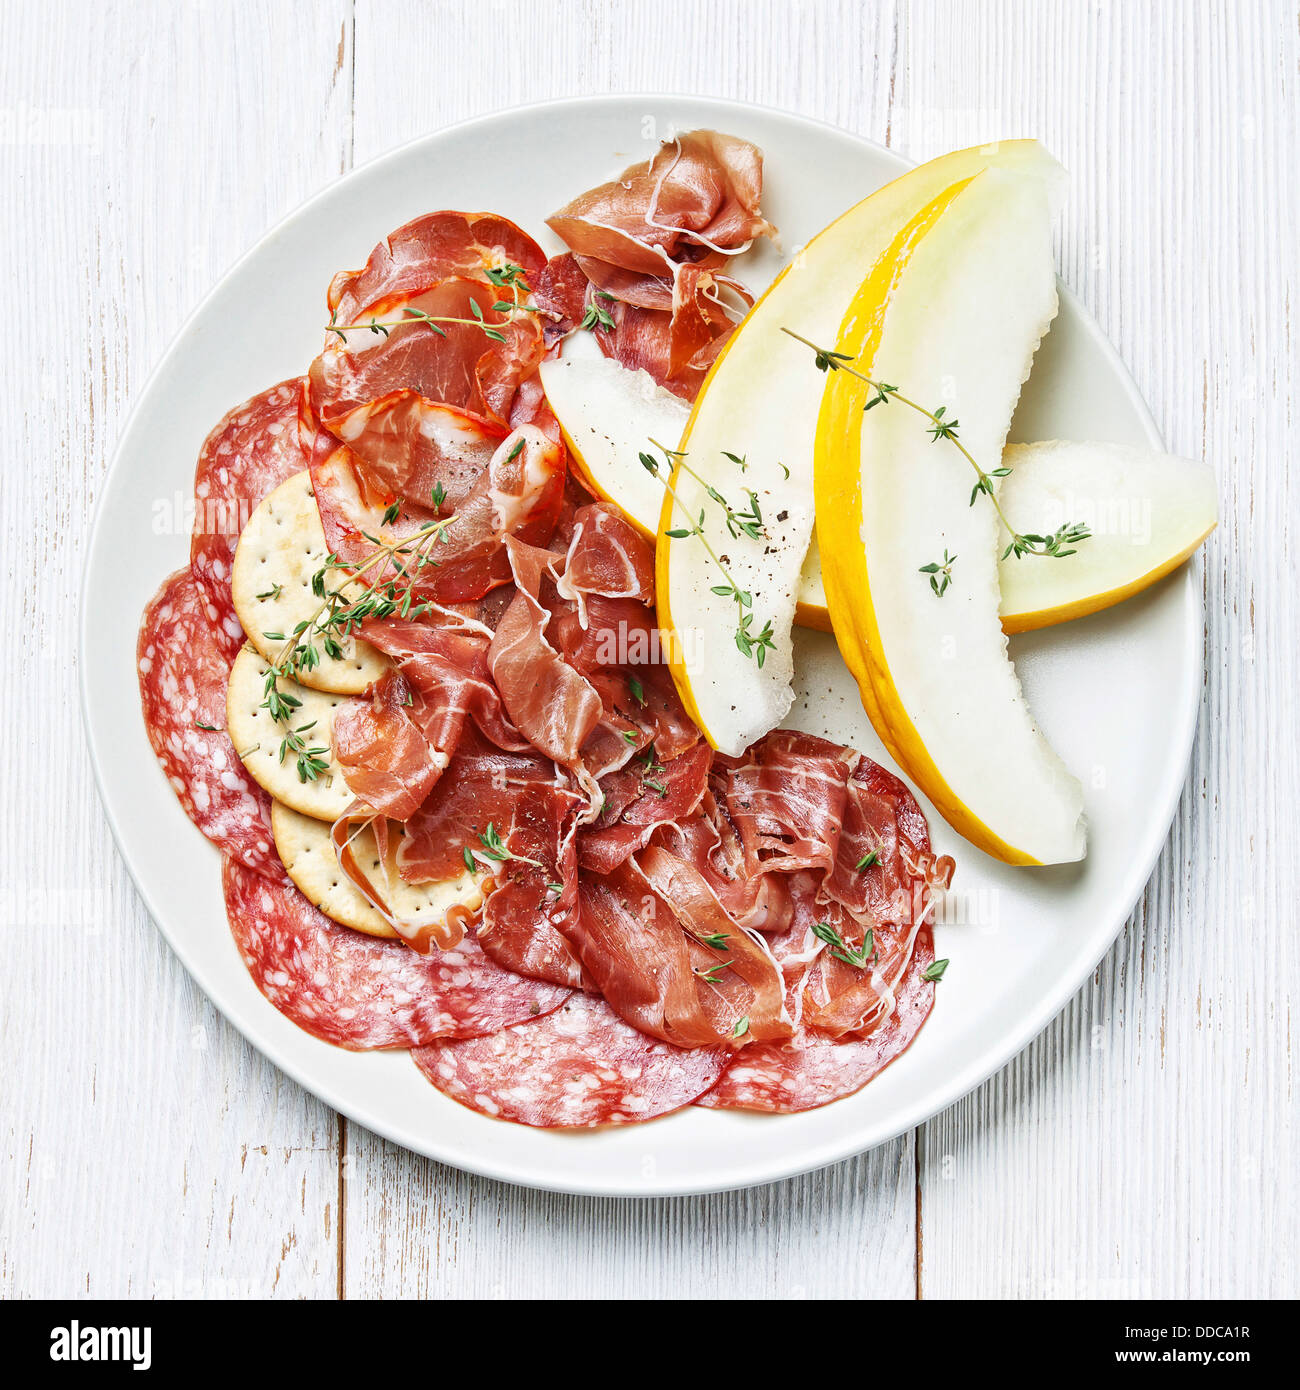 Platter of Assorted Cured Meats and Melon Stock Photo